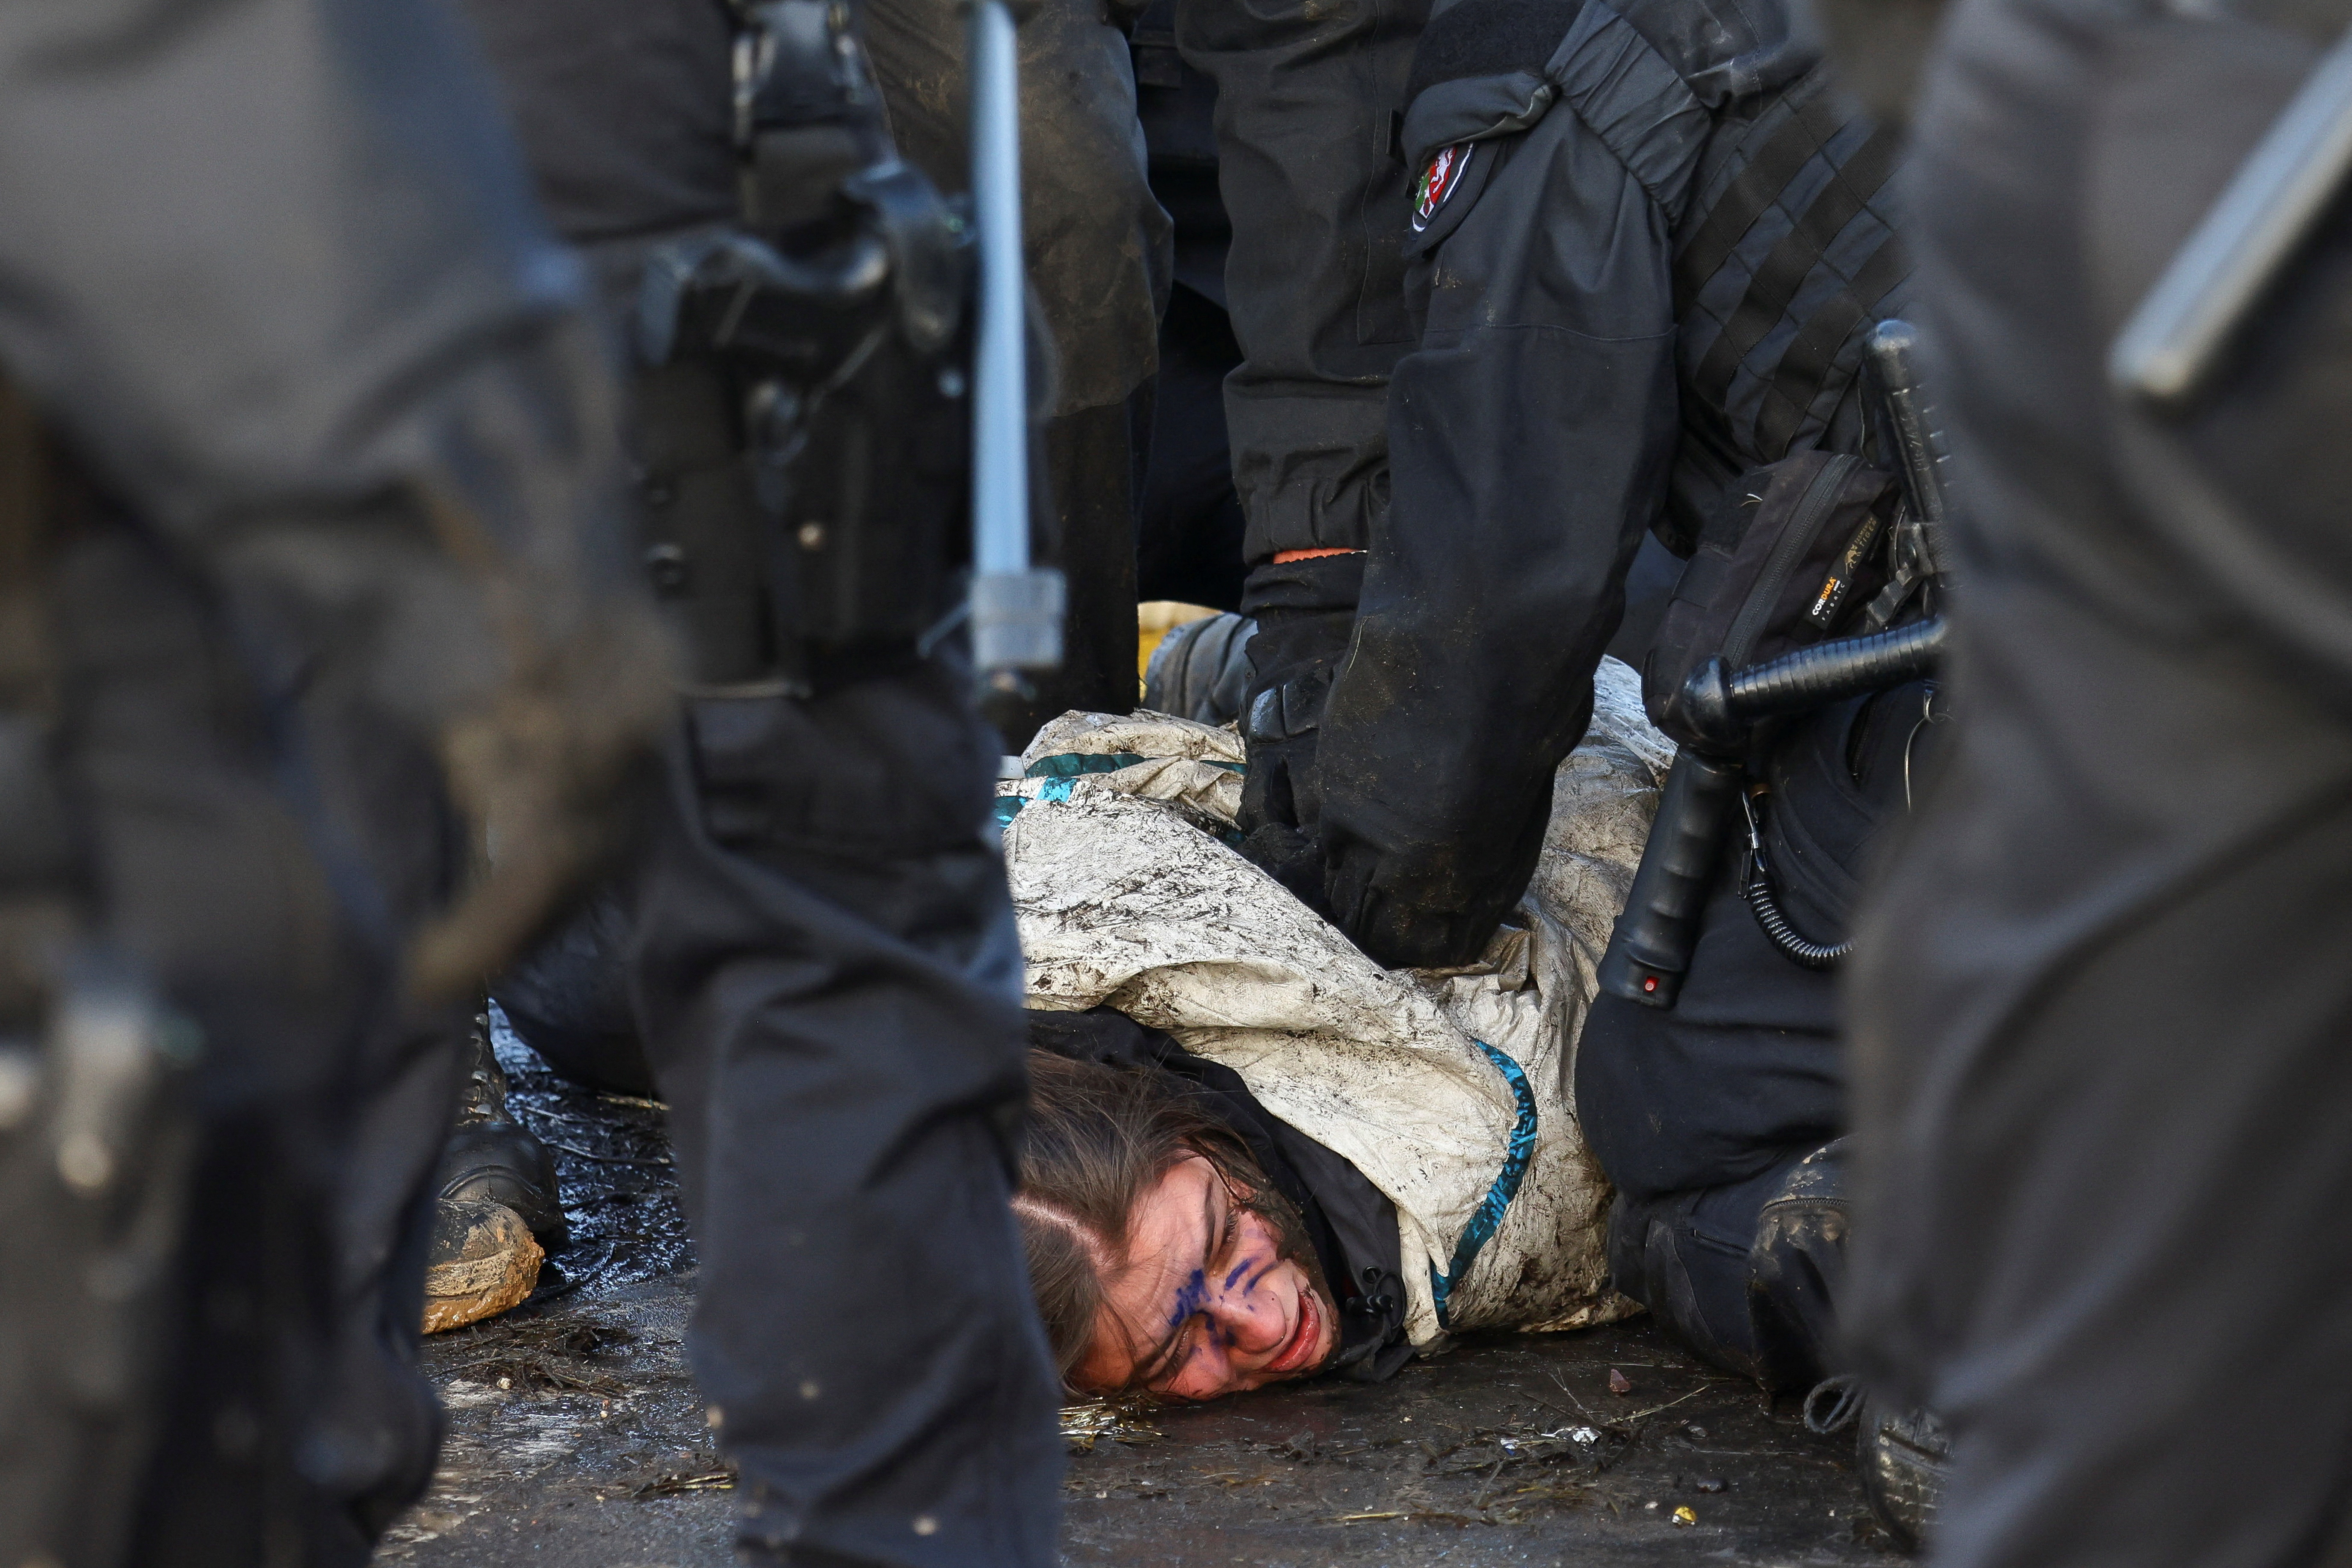 Police officers detain an activist during the sit-in protest against the expansion of the Garzweiler open-cast lignite mine. /Christian Mang/Reuters